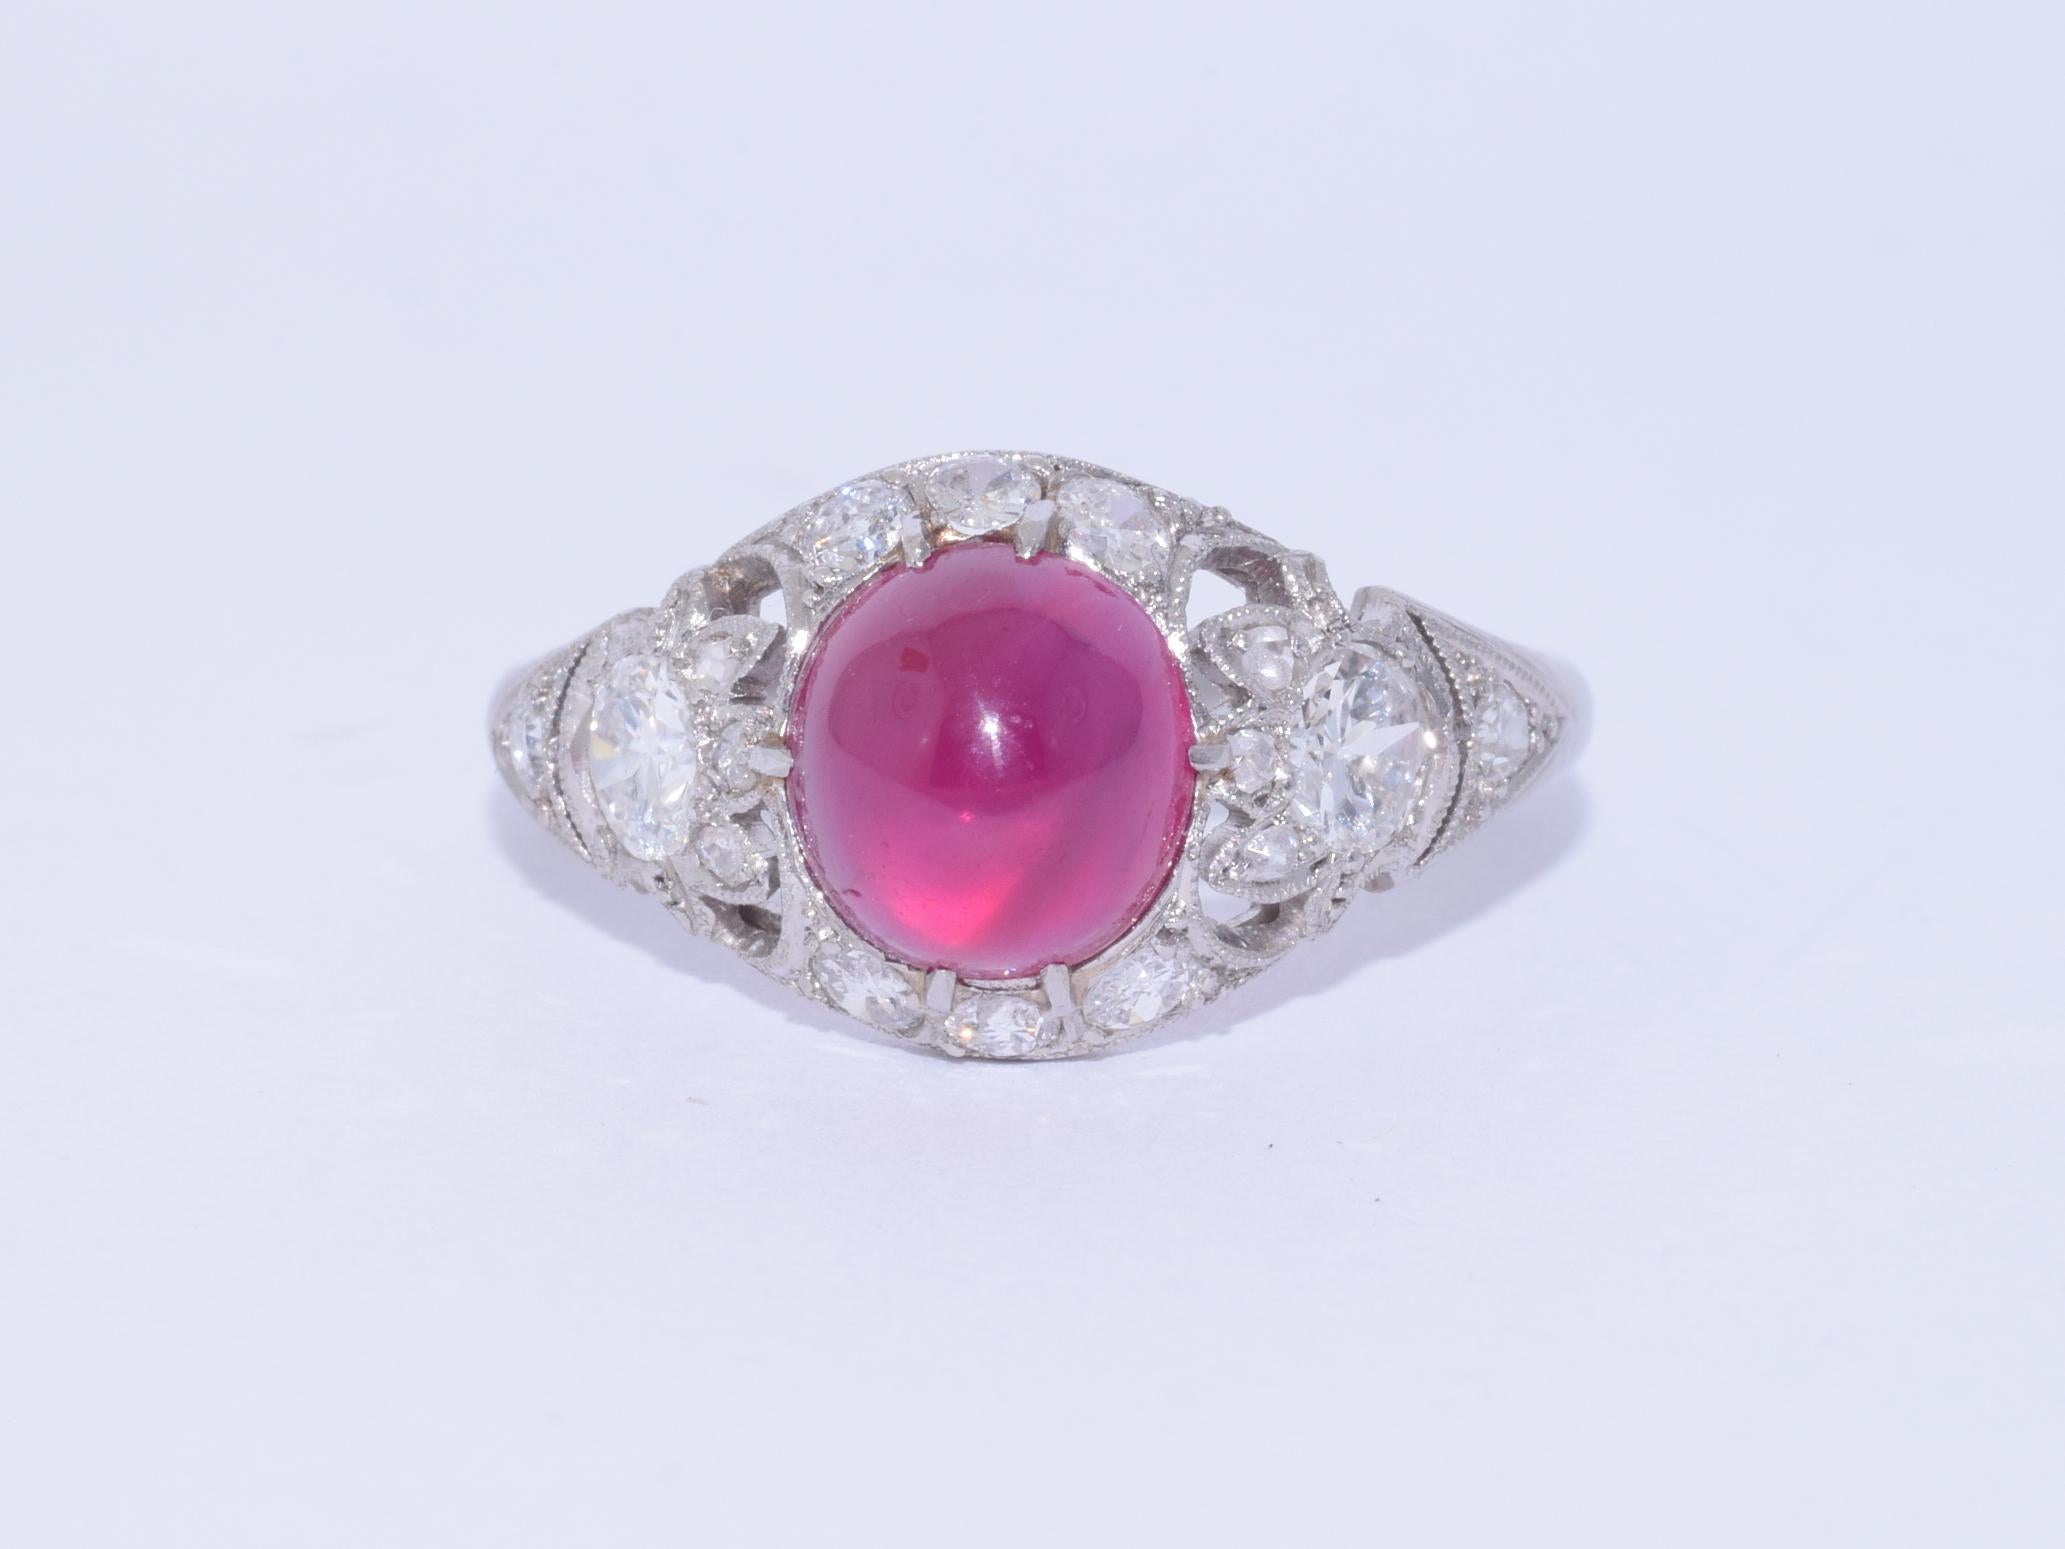 A cabochon ruby weighing approximately 3 carats is set in a platinum mounting accented with old European, round and rose cut diamonds totaling approximately 0.40 carat. Circa 1920s. The head of the ring measures approximately 10.8 x 19.7mm, height